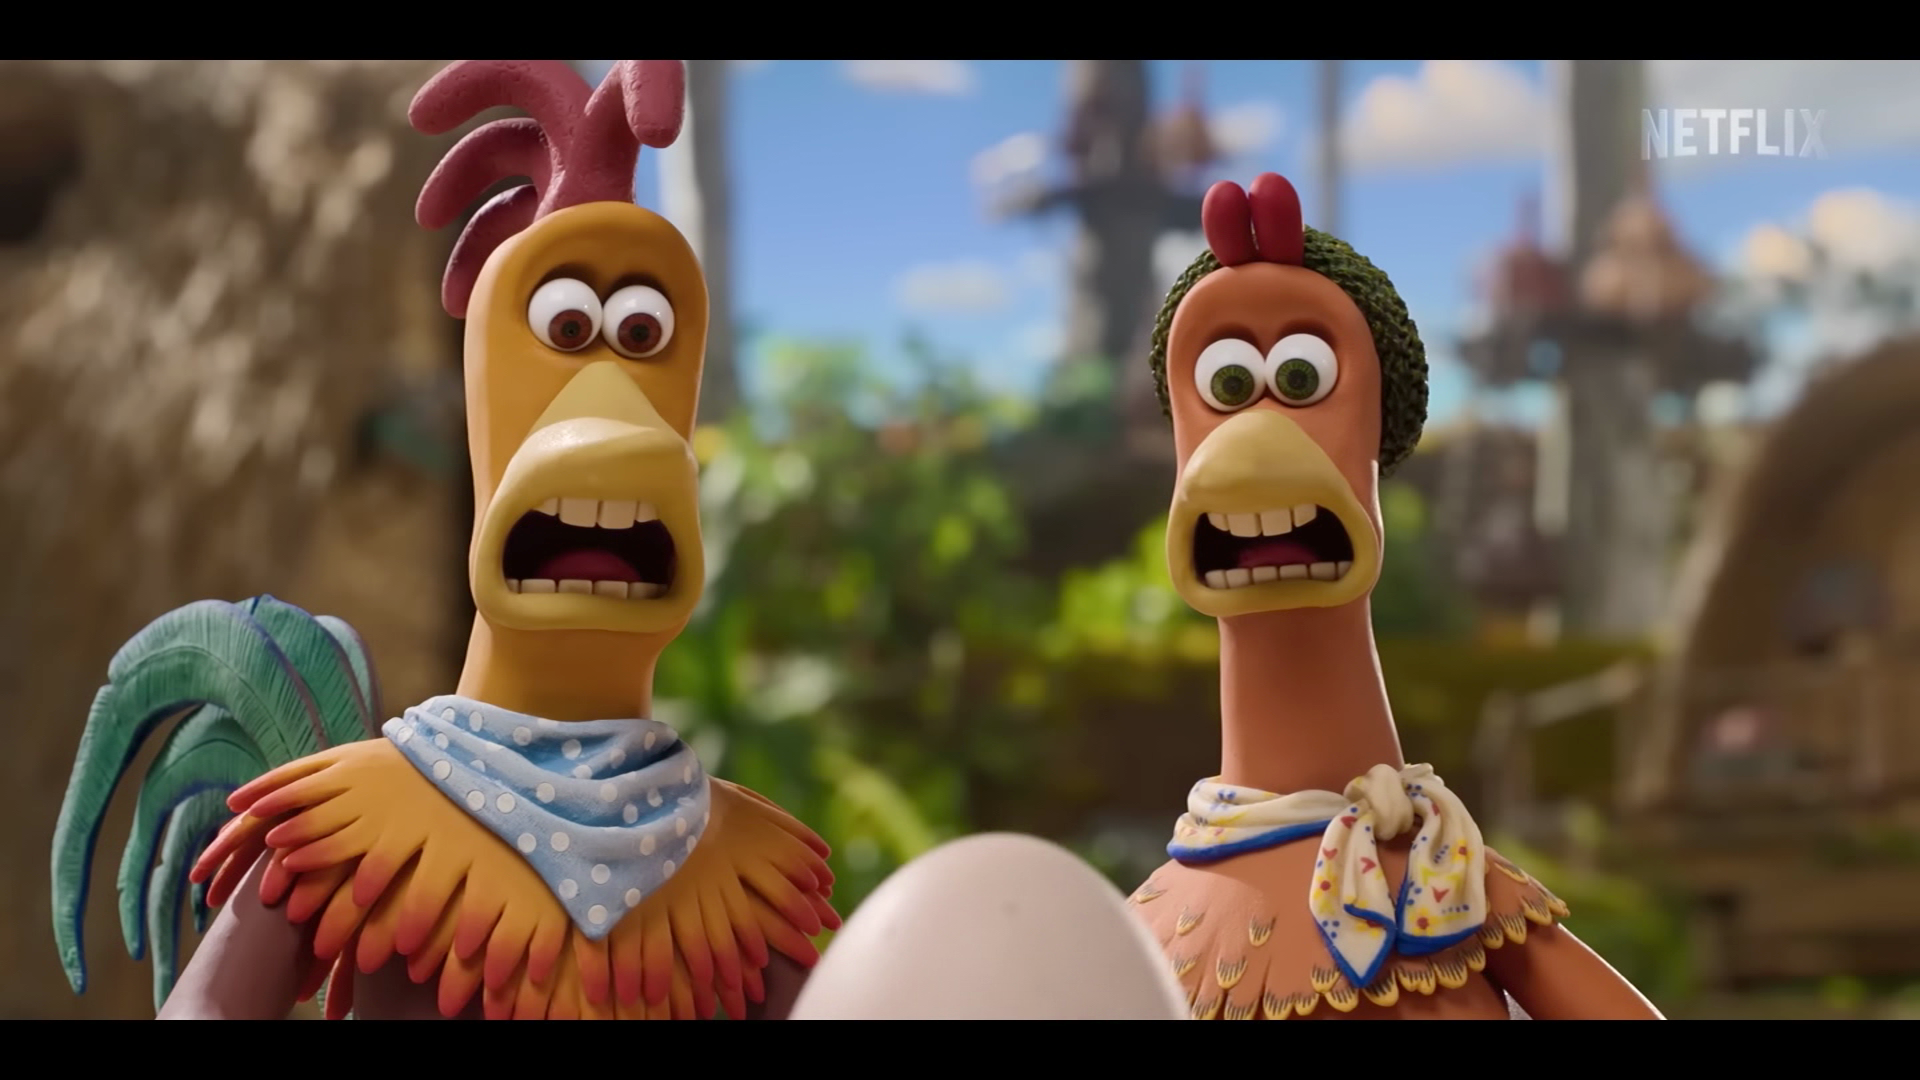 What's new on Netflix, Apple TV+: Chicken Run, The Family Plan,  Finestkind